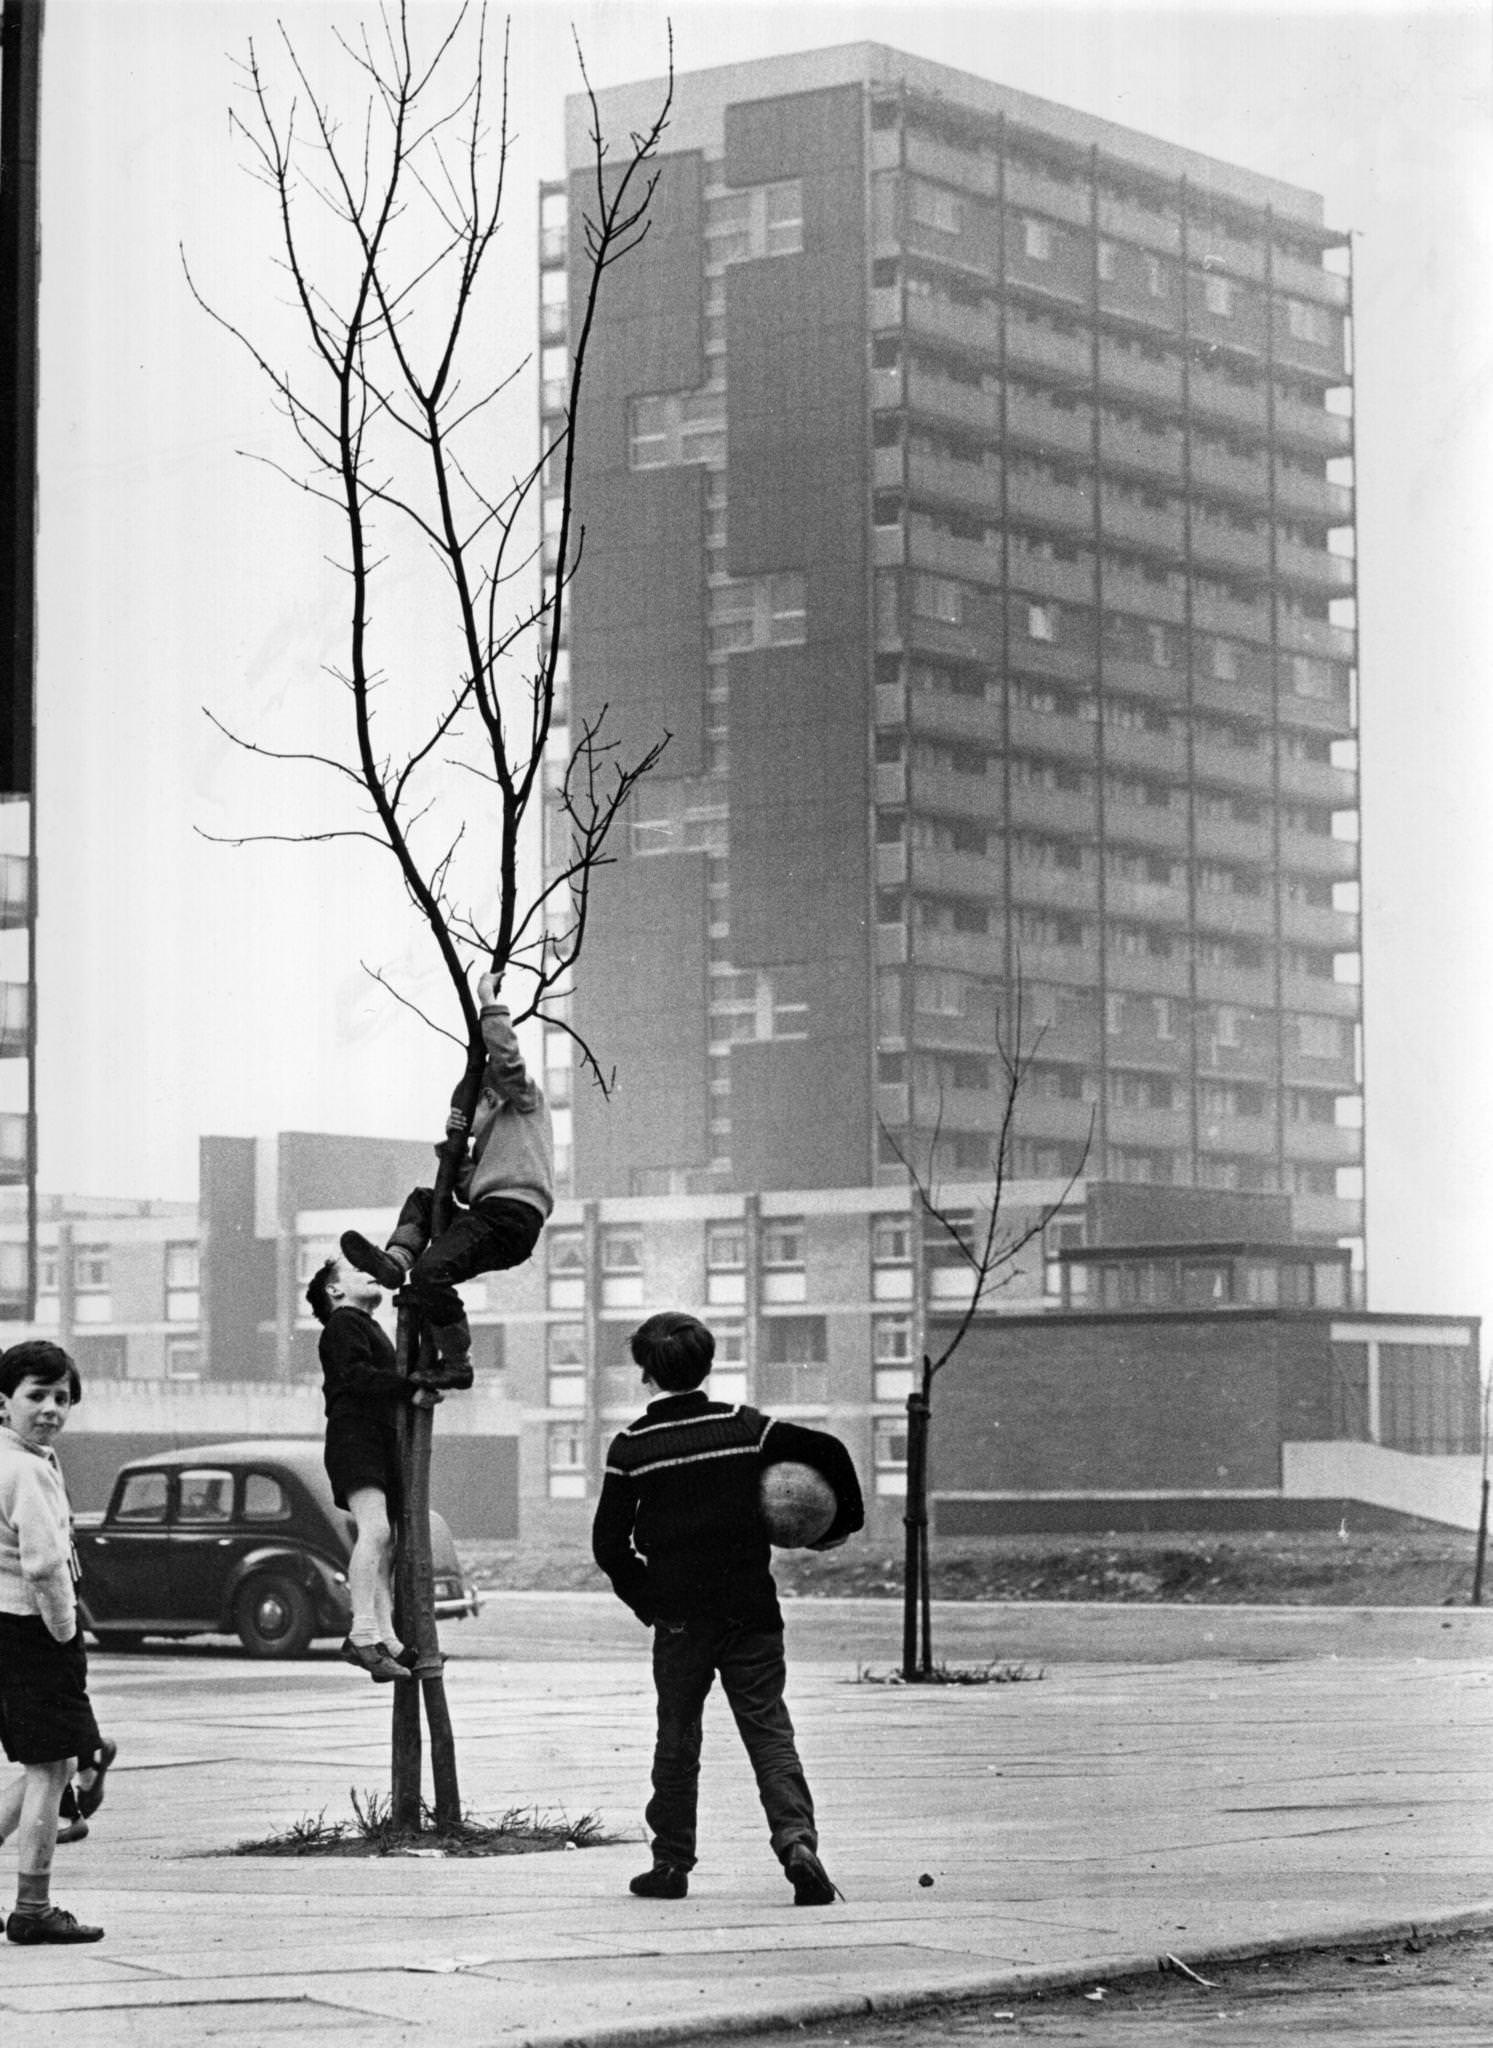 Boys climbing a tree near a modern tower block in the Gorbals area of Glasgow, 1960